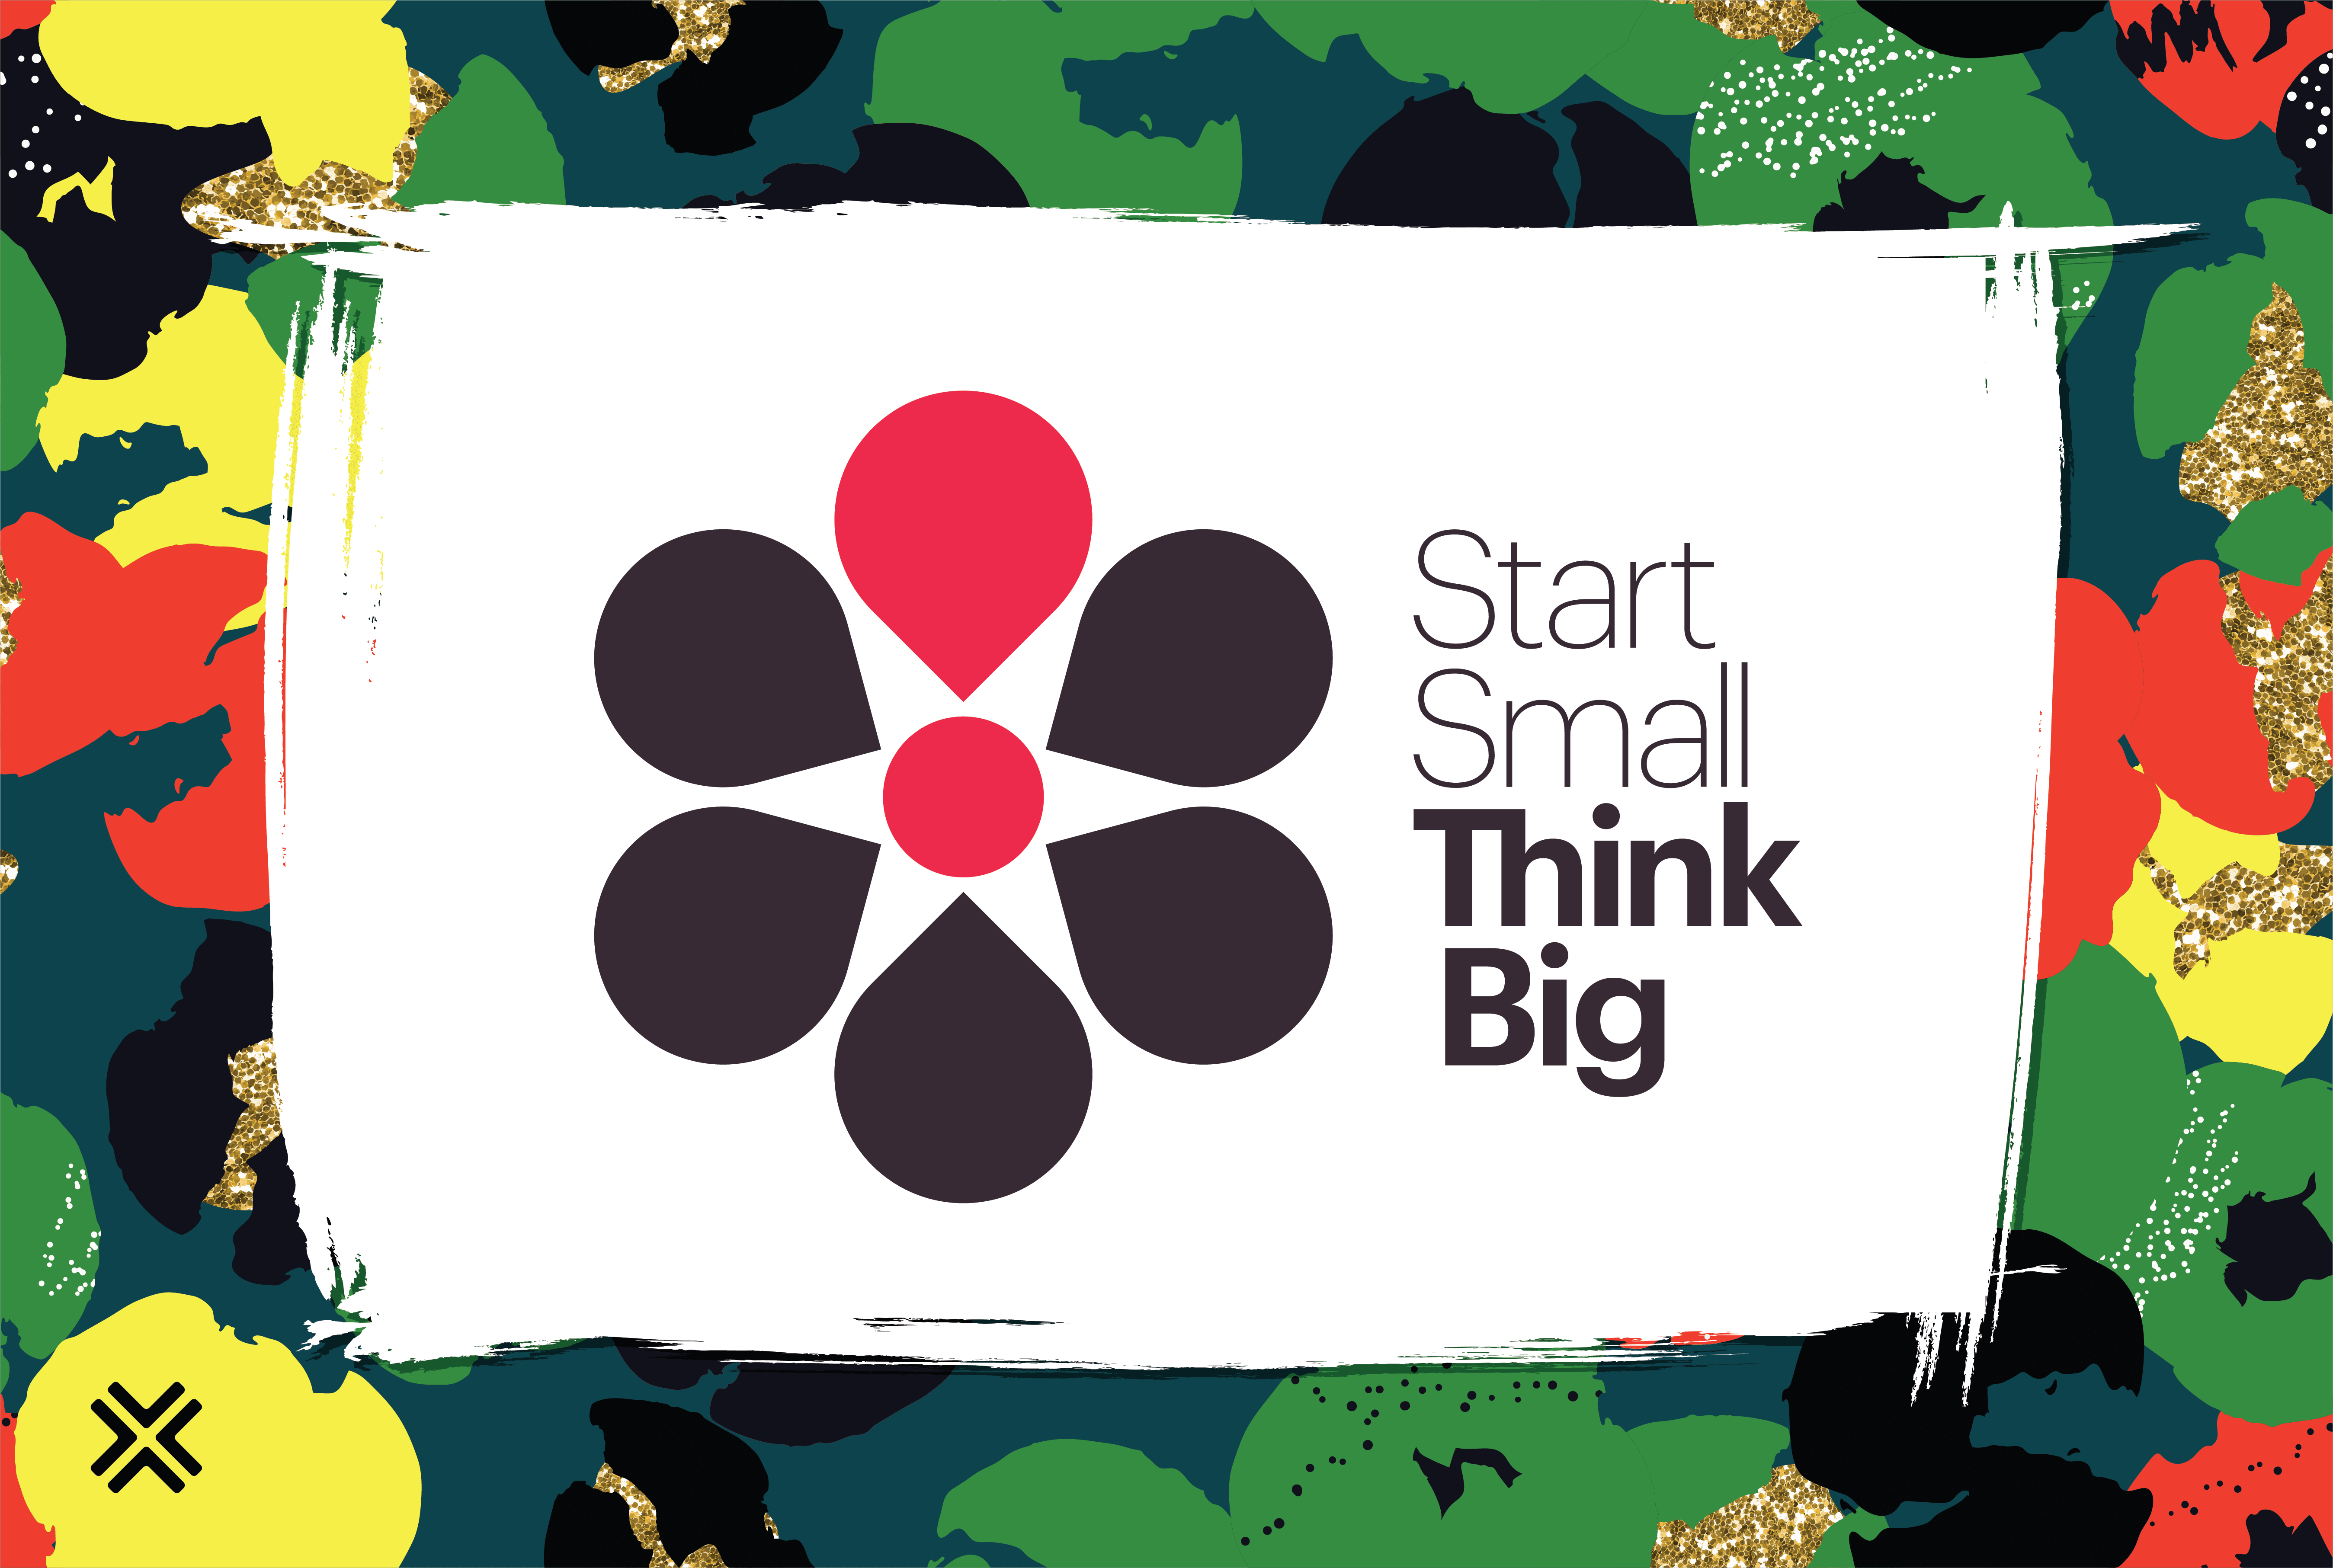 Start Small Think Big graphic floral logo.